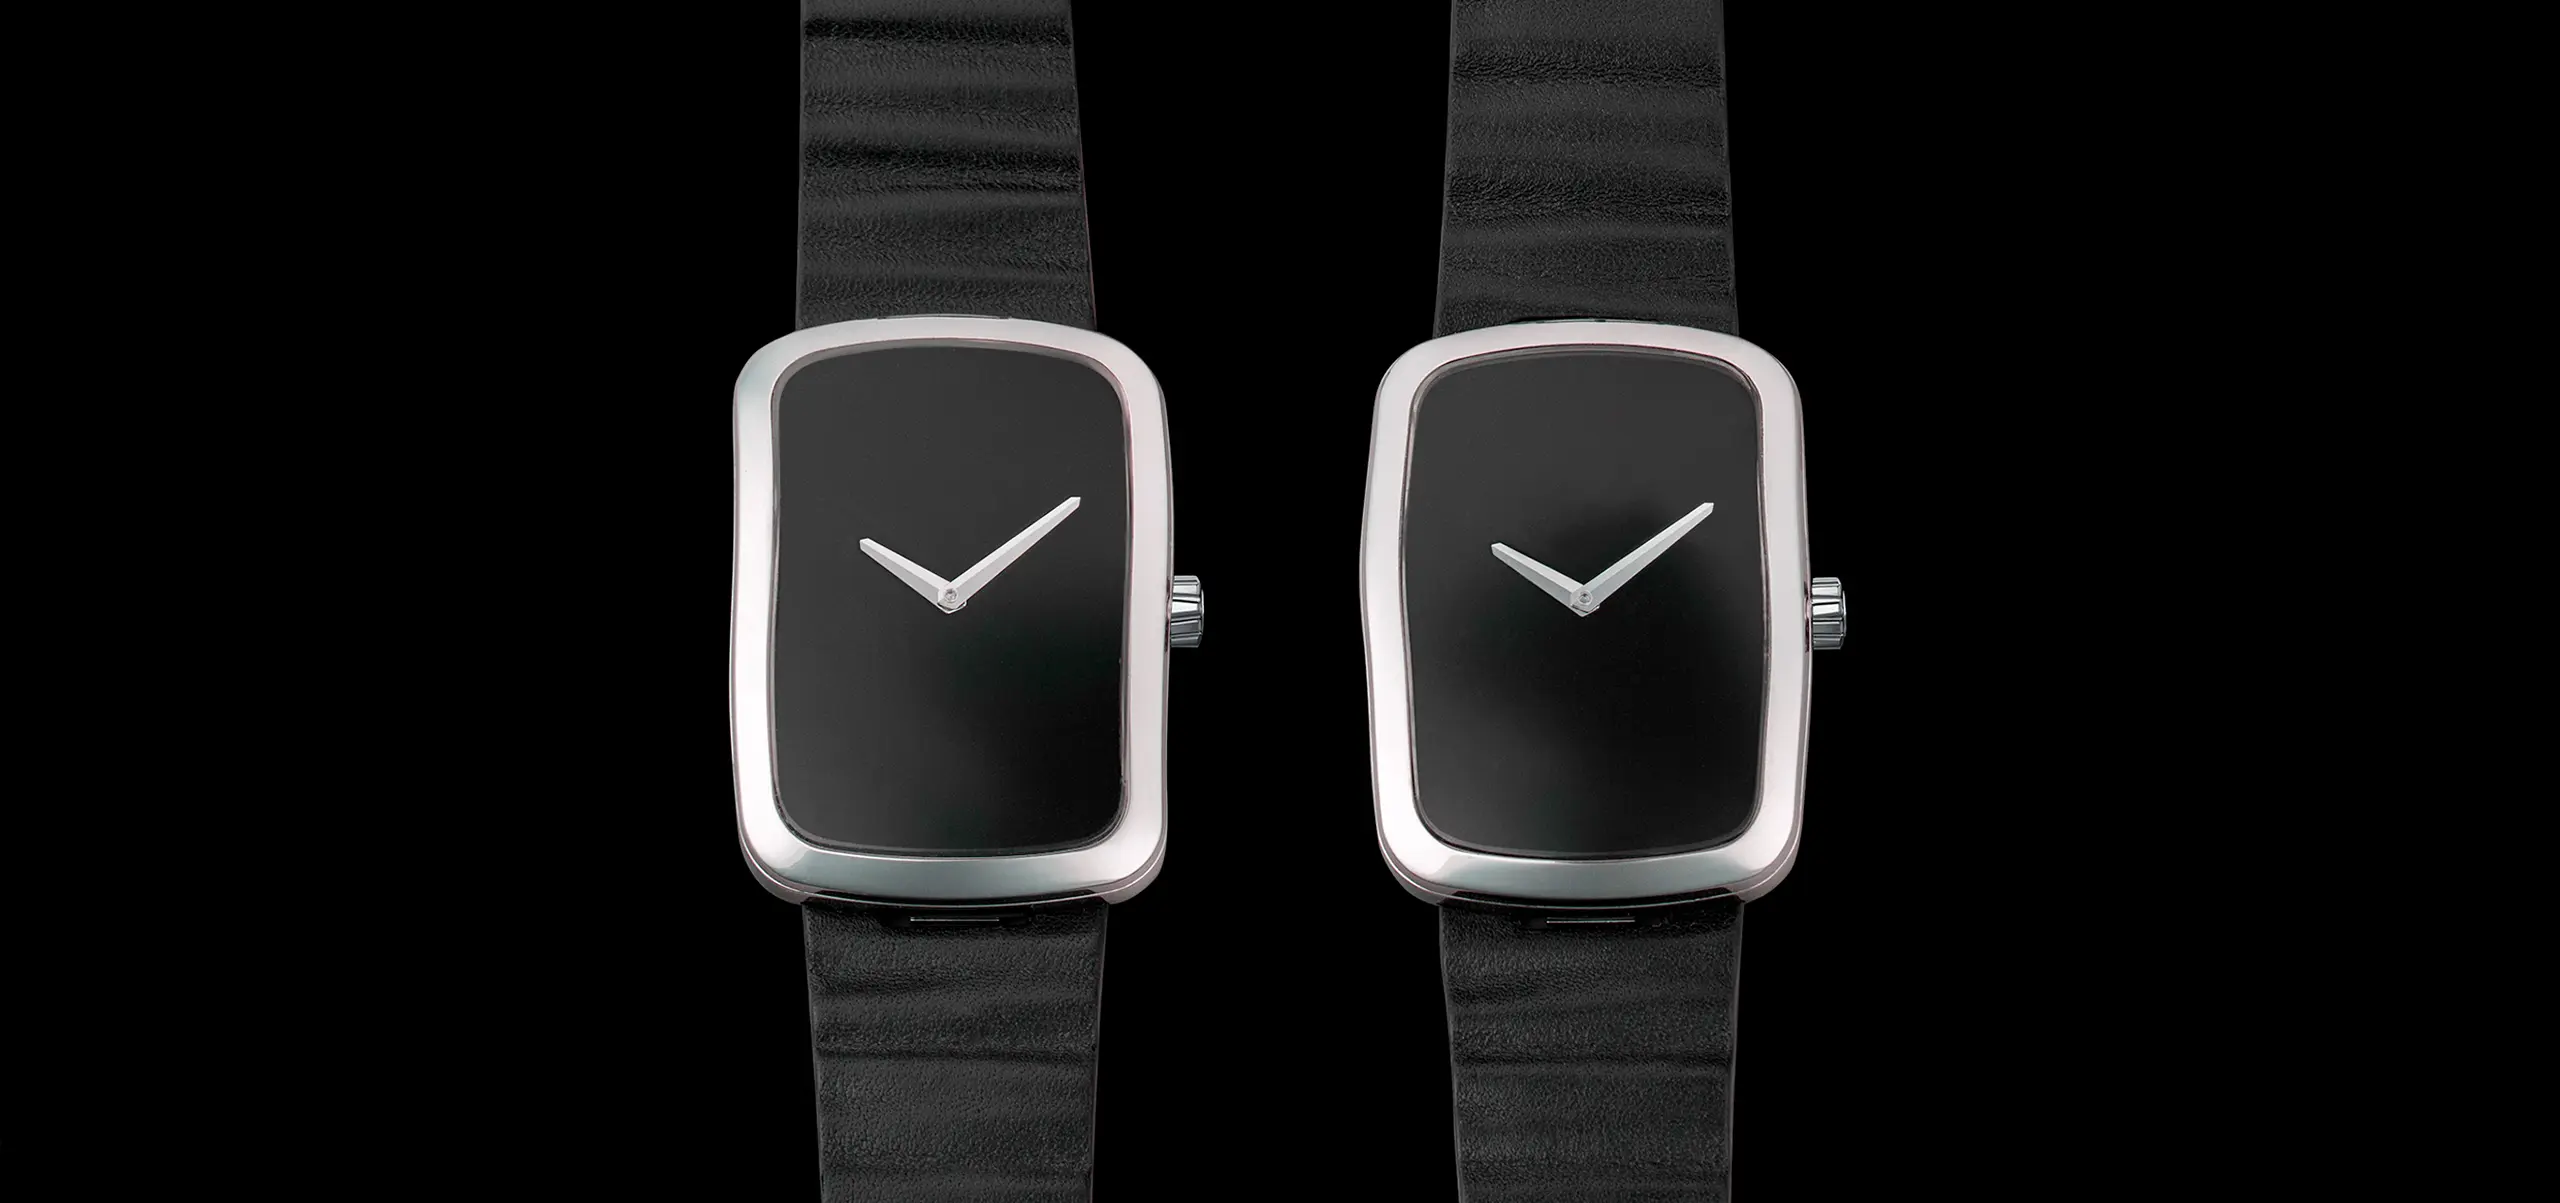 disruptive luxury watch design concept by groen and boothman